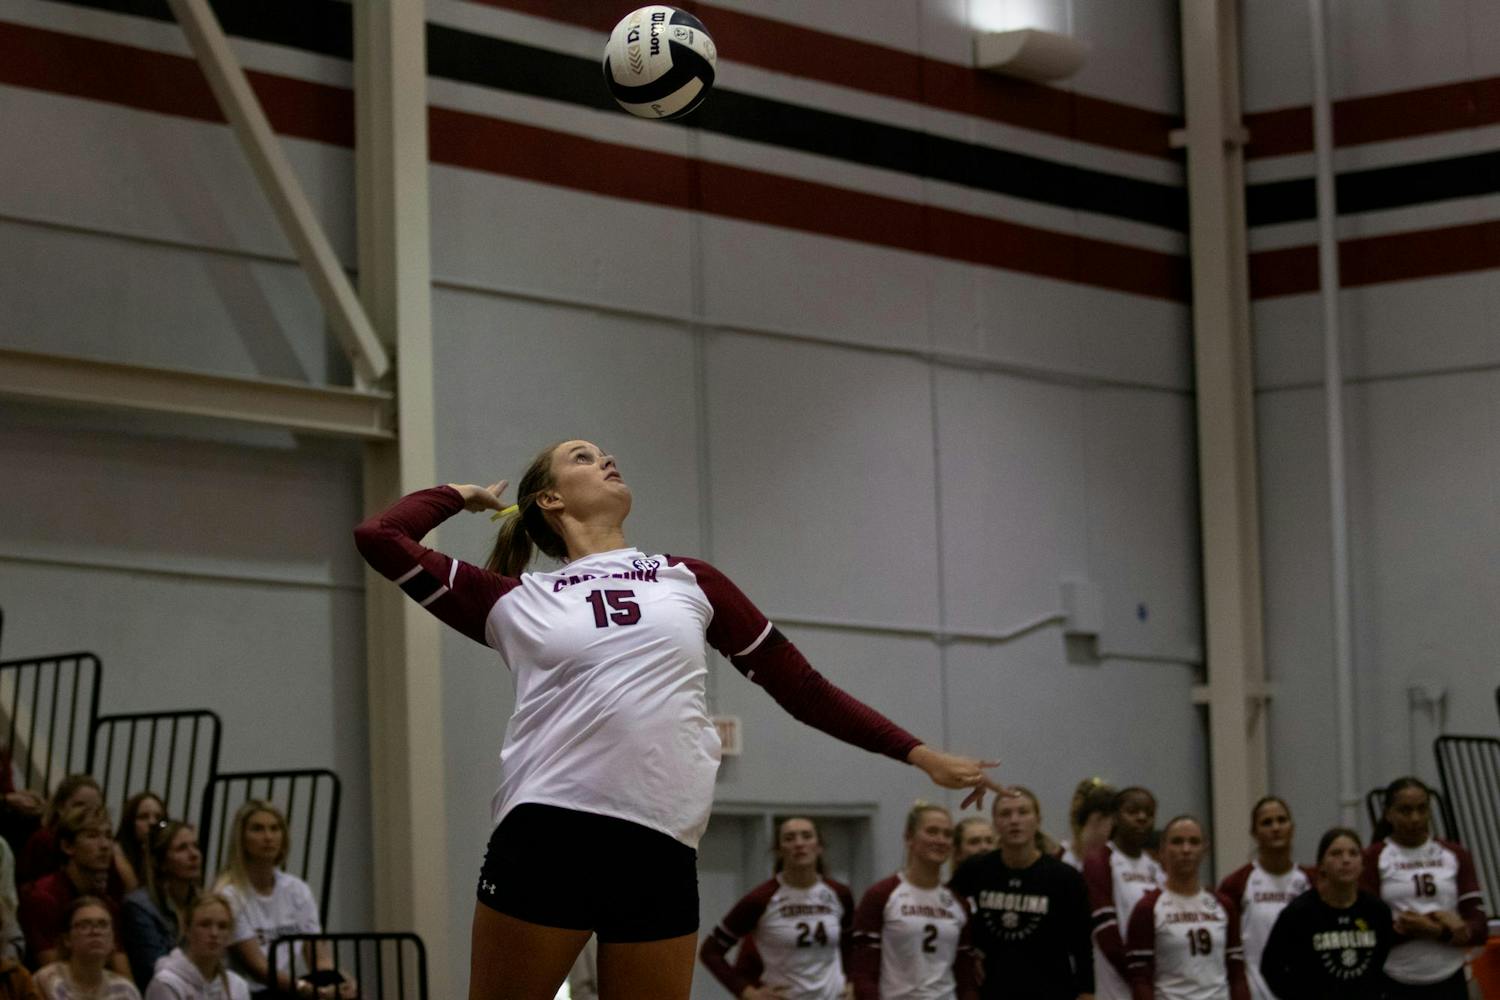 Junior setter Claire Wilson serves the ball to initiate a point at the Carolina Volleyball Center on Oct. 8, 2023. The Gamecocks fell to the Tigers 3-2 in a five set match.